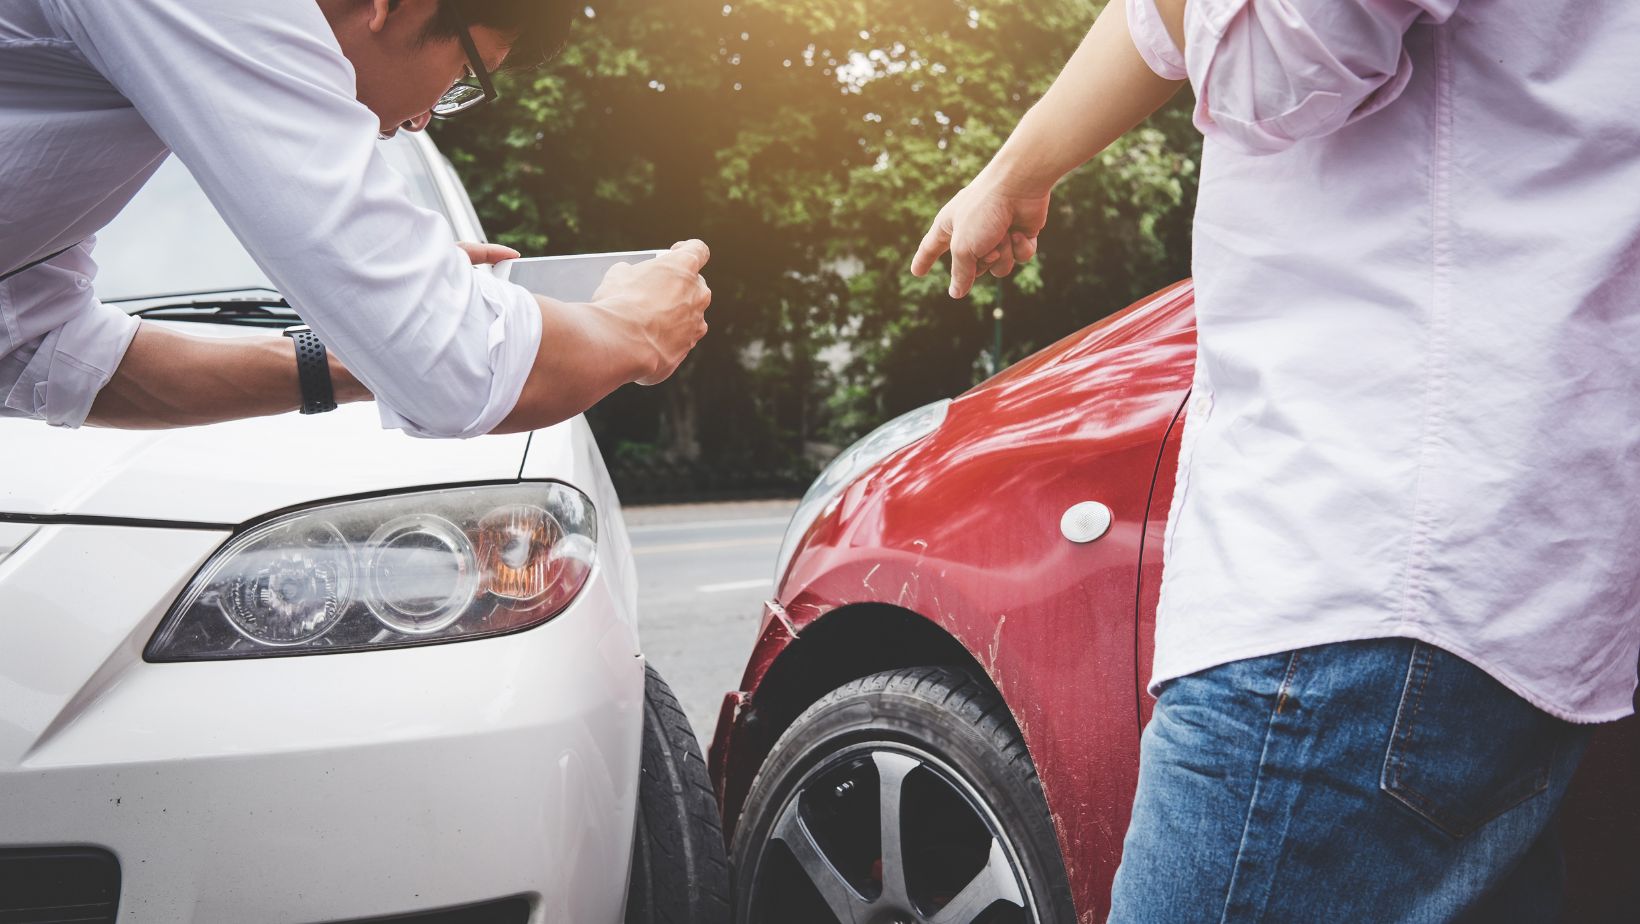 Benefits of an accident repair in Austin